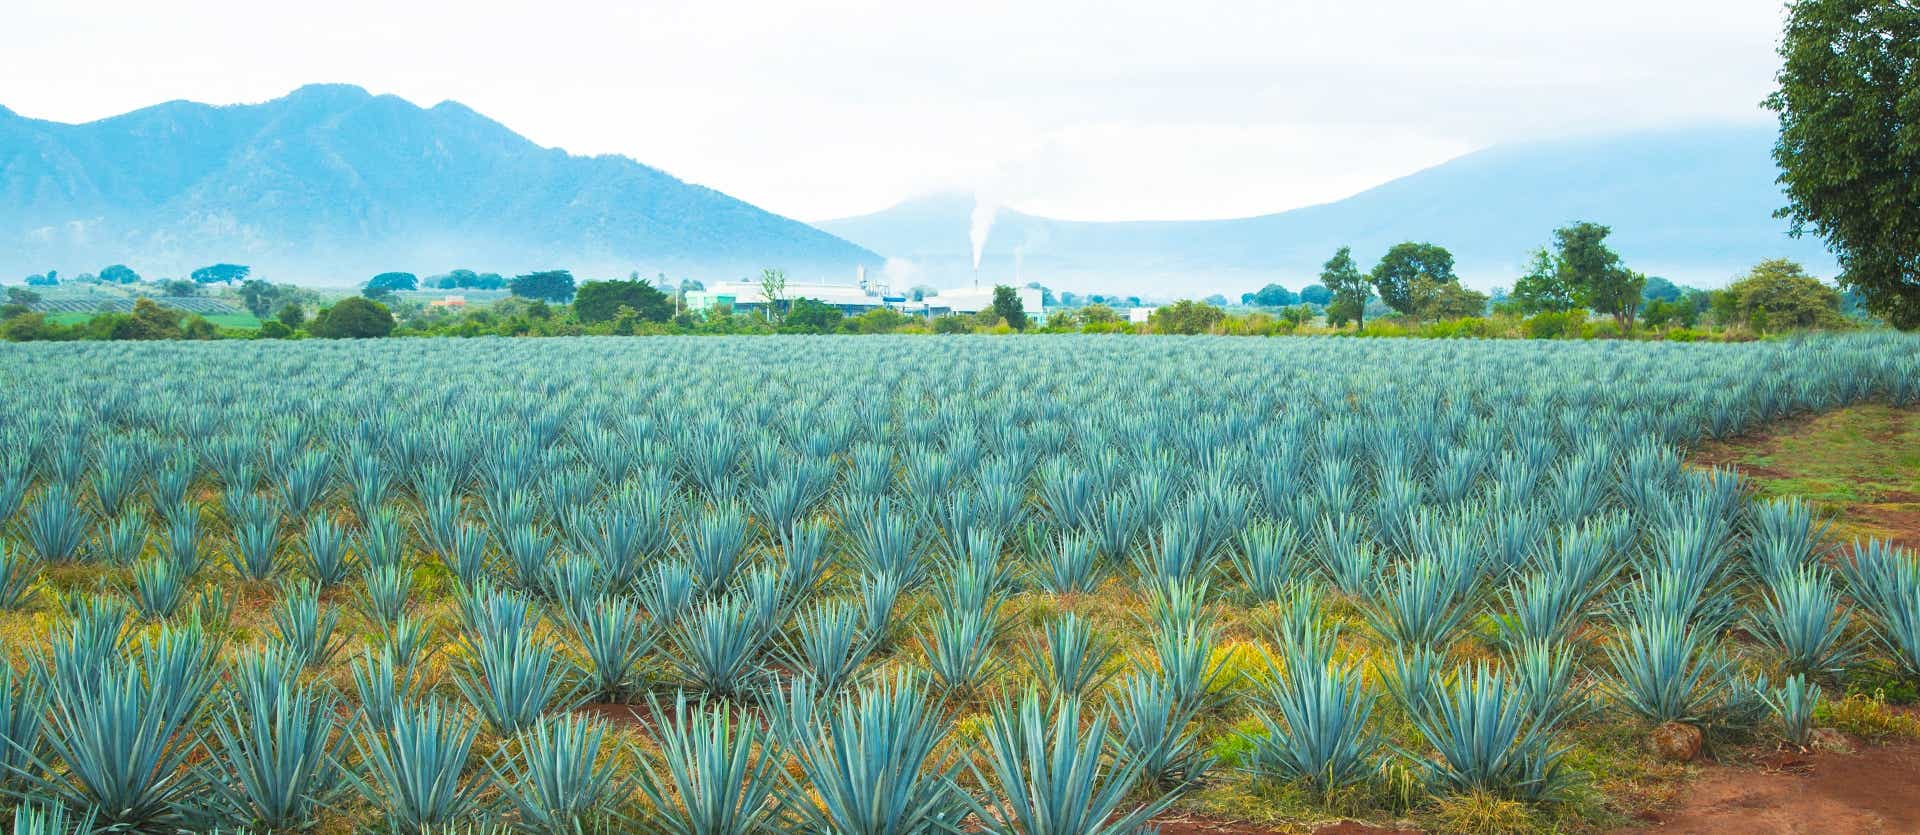 Champs d'agaves <span class="iconos separador"></span> Tequila